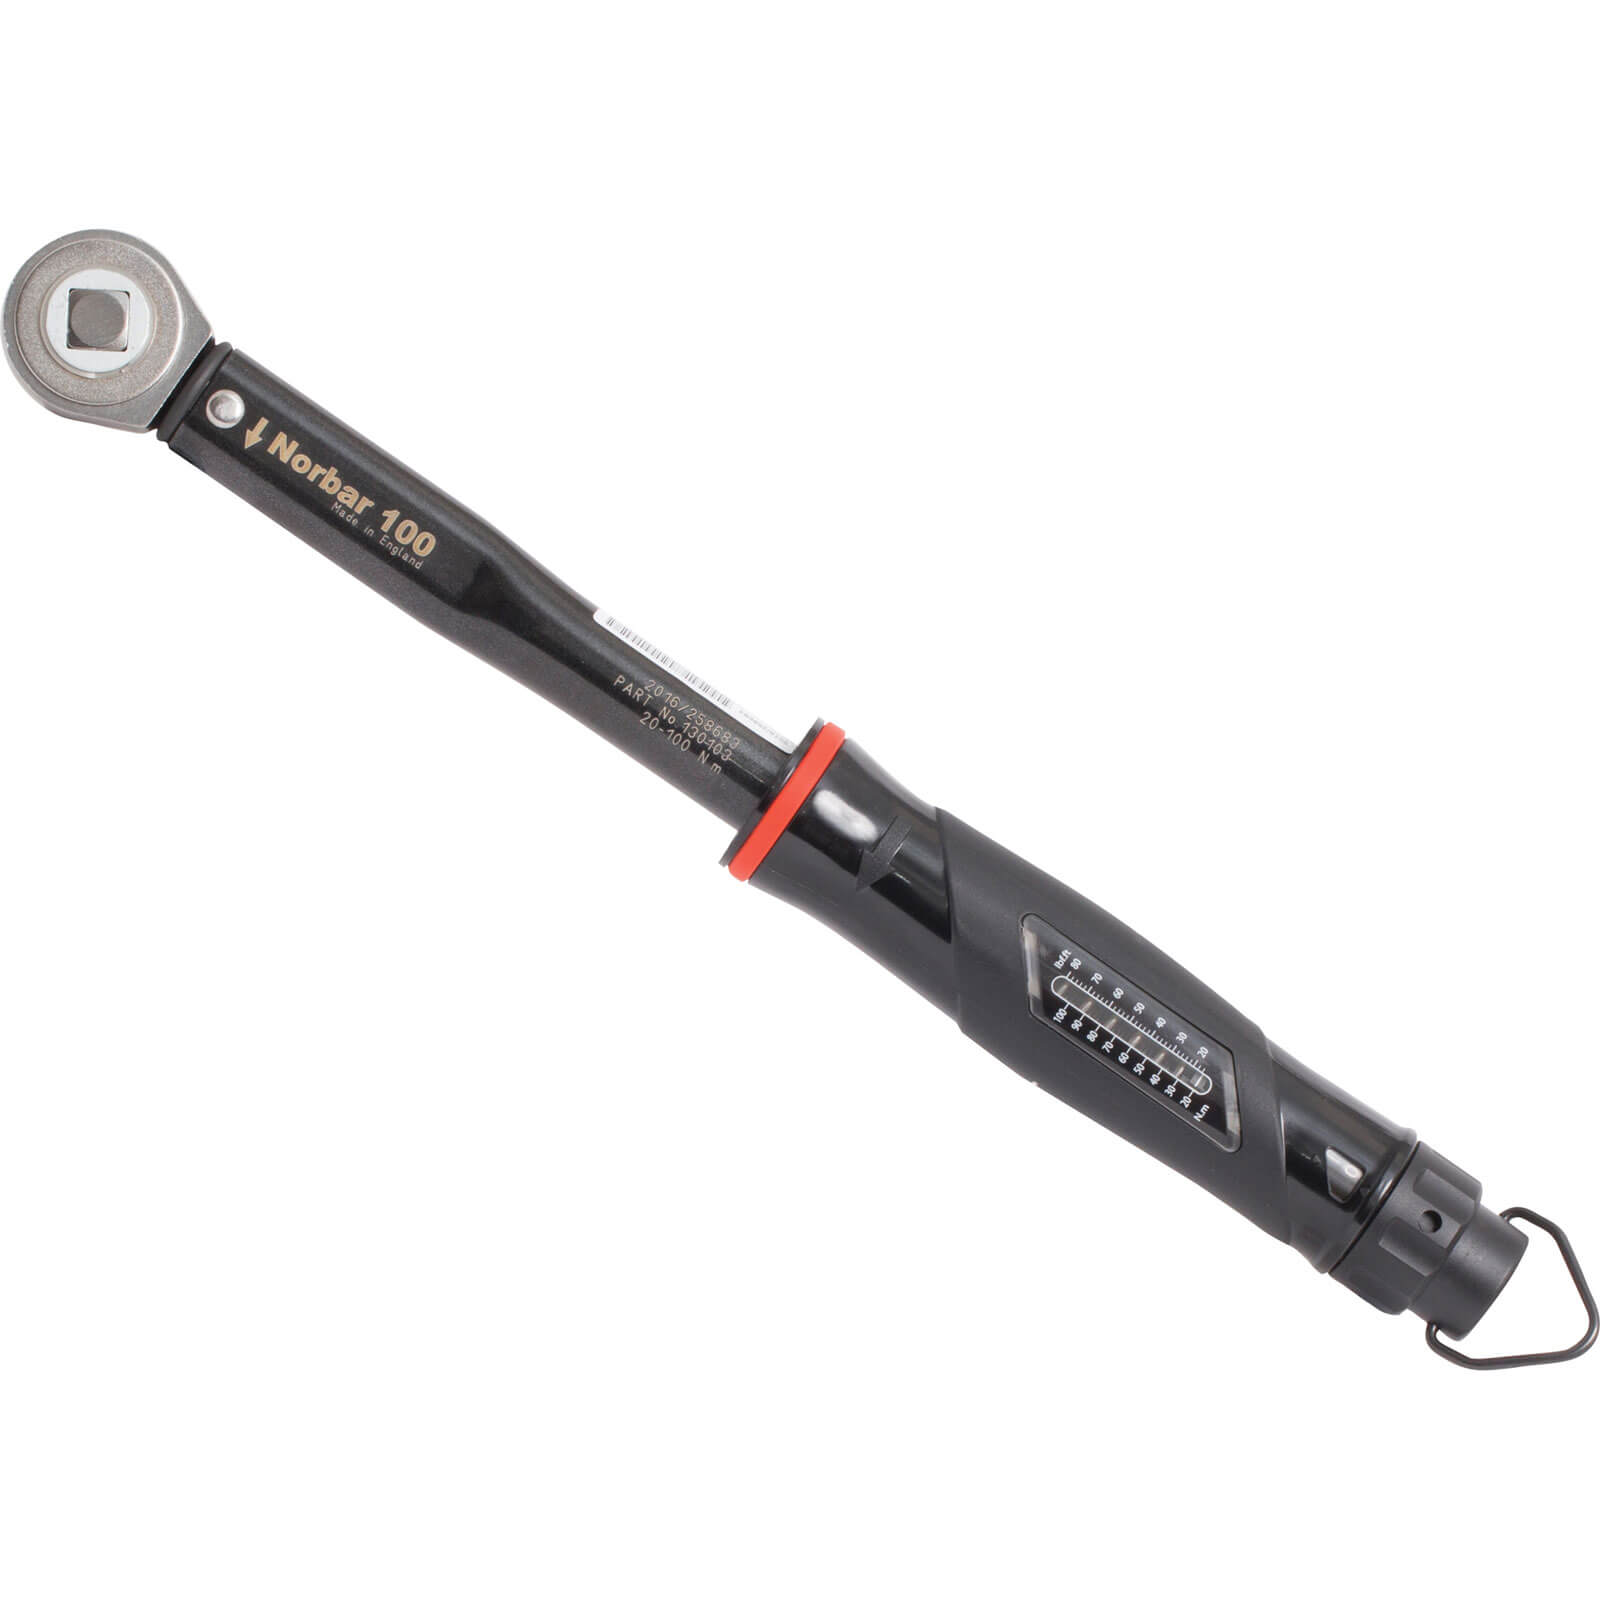 Image of Norbar 1/2" Nortorque Adjustable Dual Scale Ratchet Torque Wrench 1/2" 20Nm - 100Nm